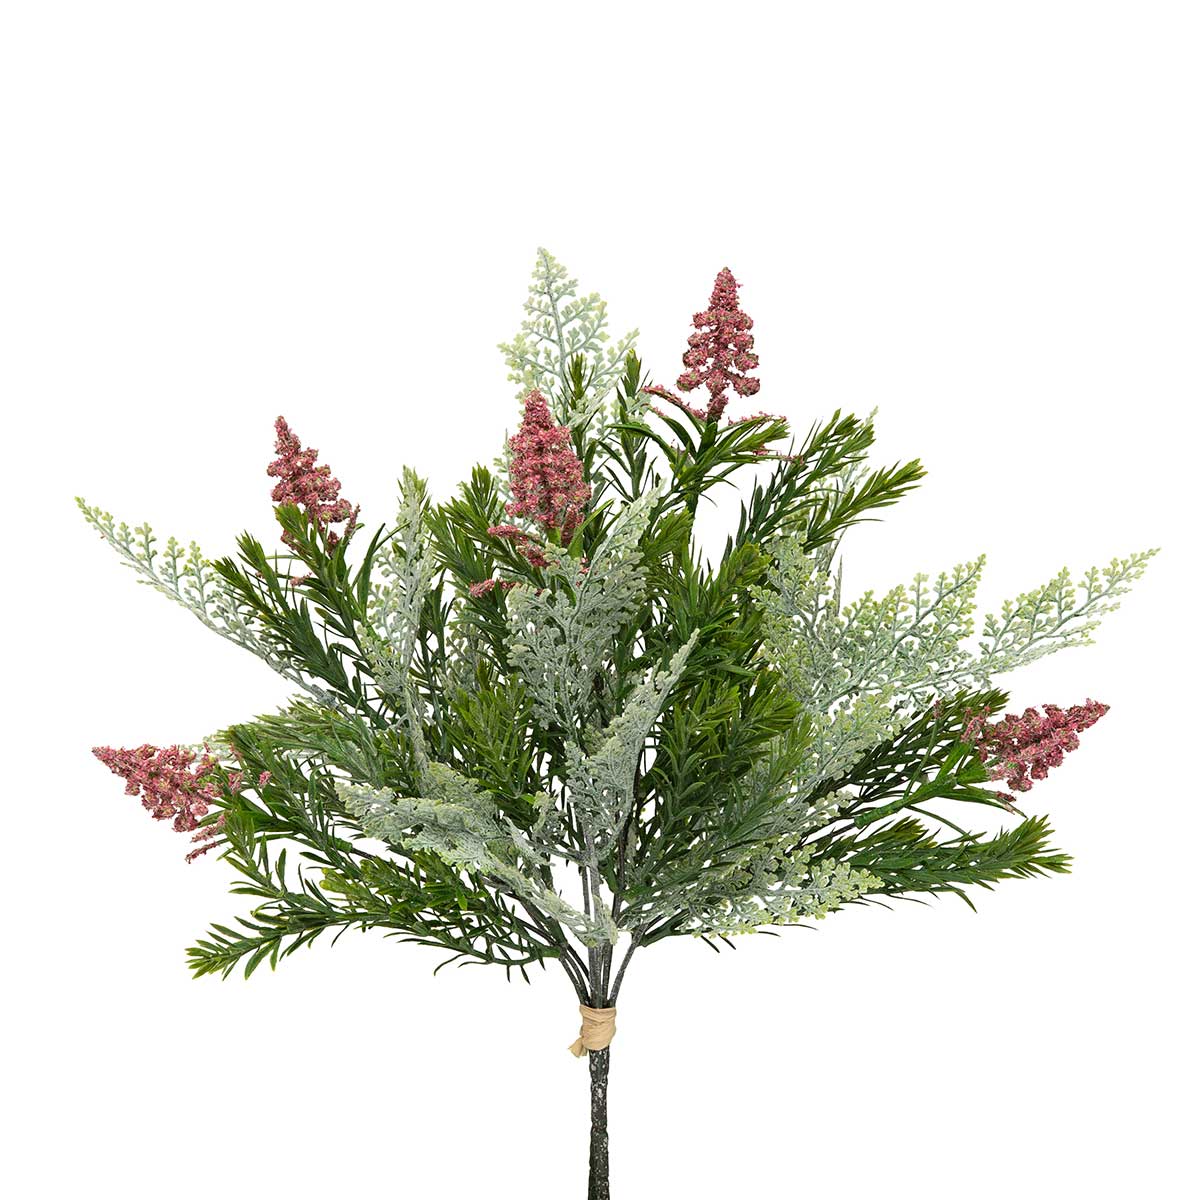 BOUQUET OF 2 ASTILBE/FERN BEAUTY 7IN X 15IN TIED WITH RAFFIA - Click Image to Close